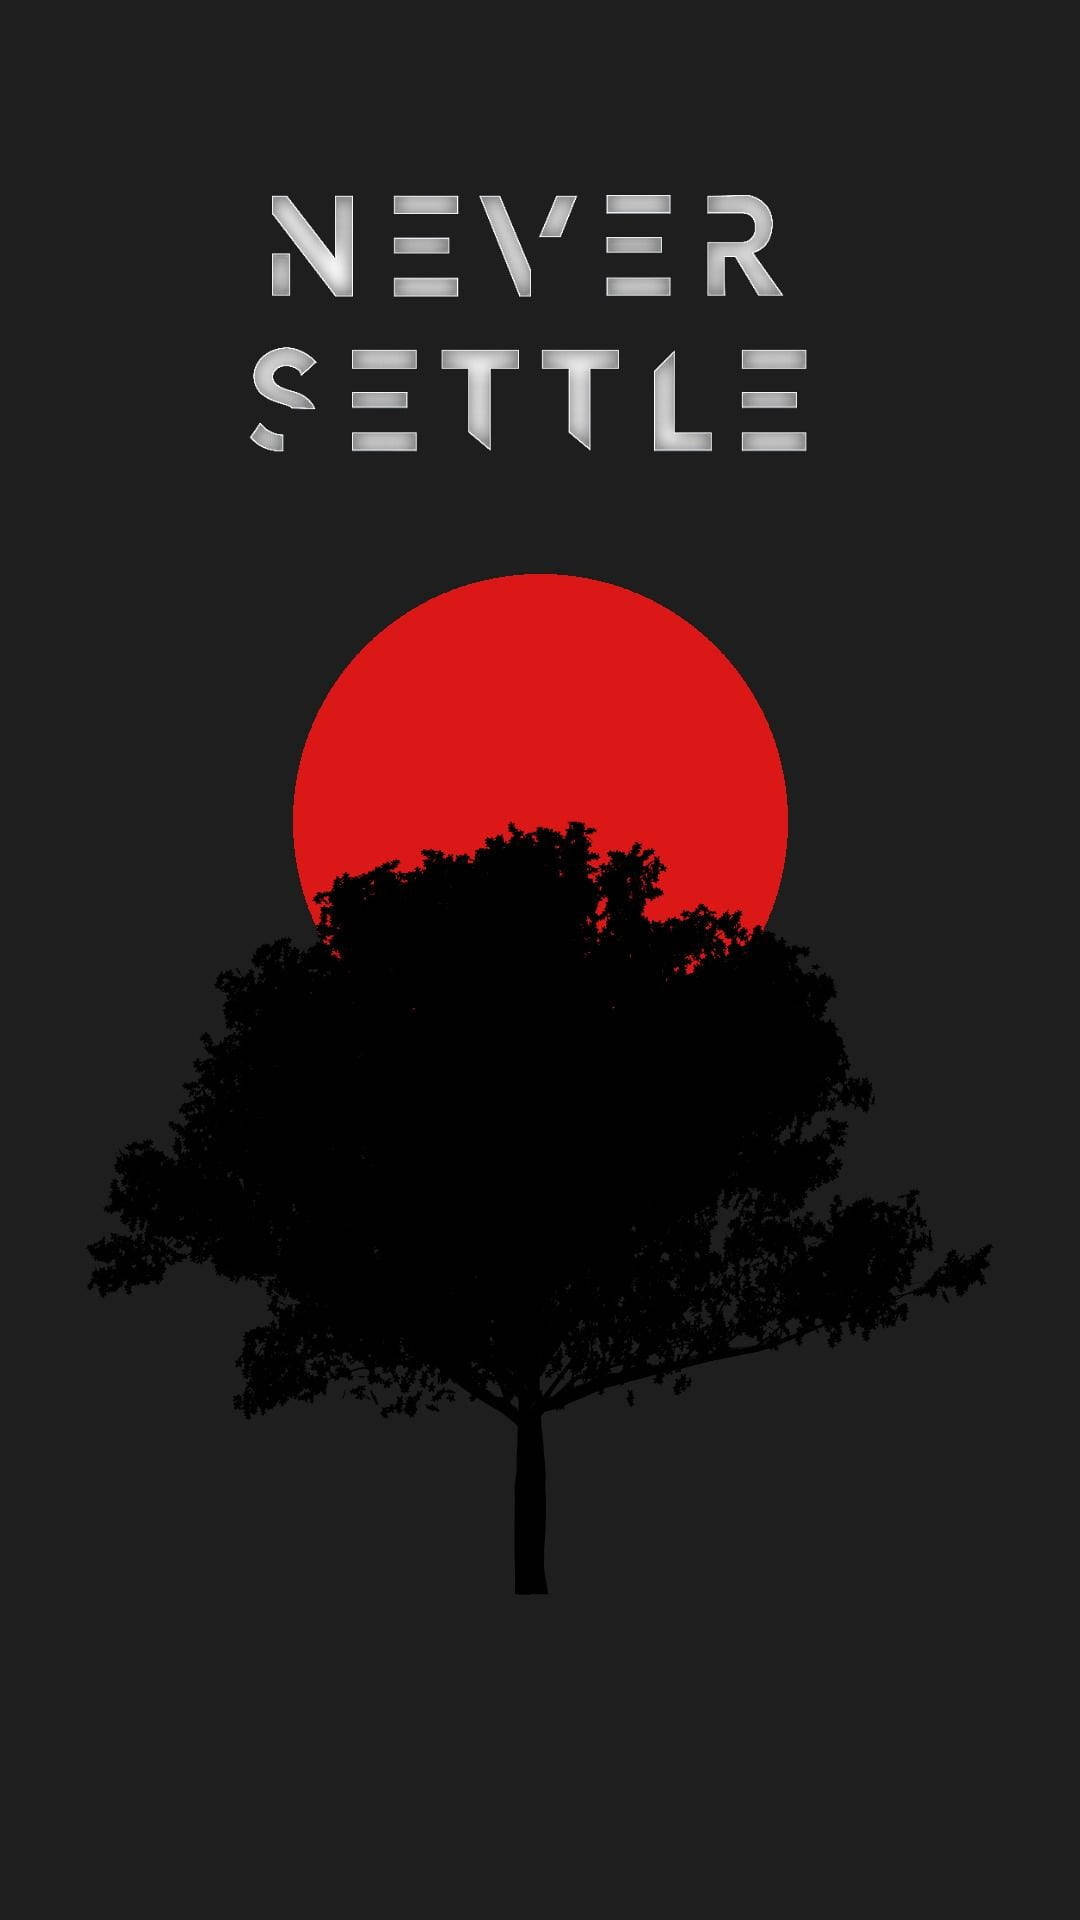 Never Settle Red Sun Tree Background